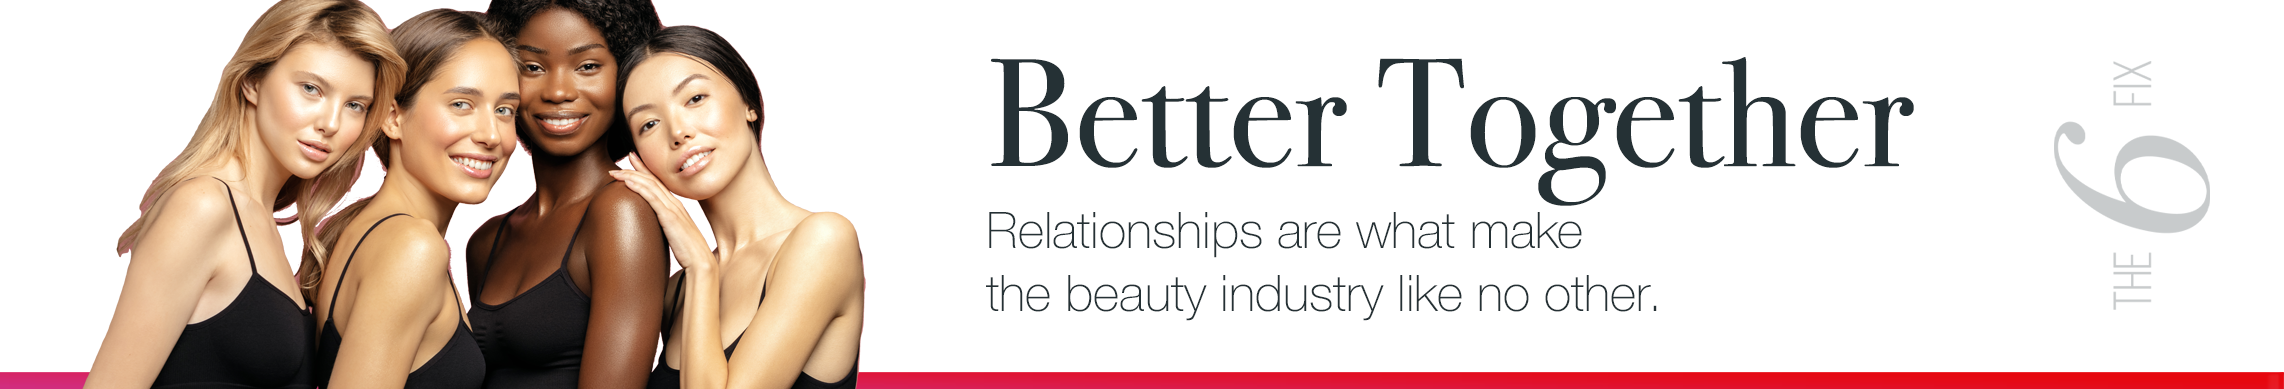 The 6 Fix brand image reads "Better Together. Relations are what make the beauty industry like no other. "